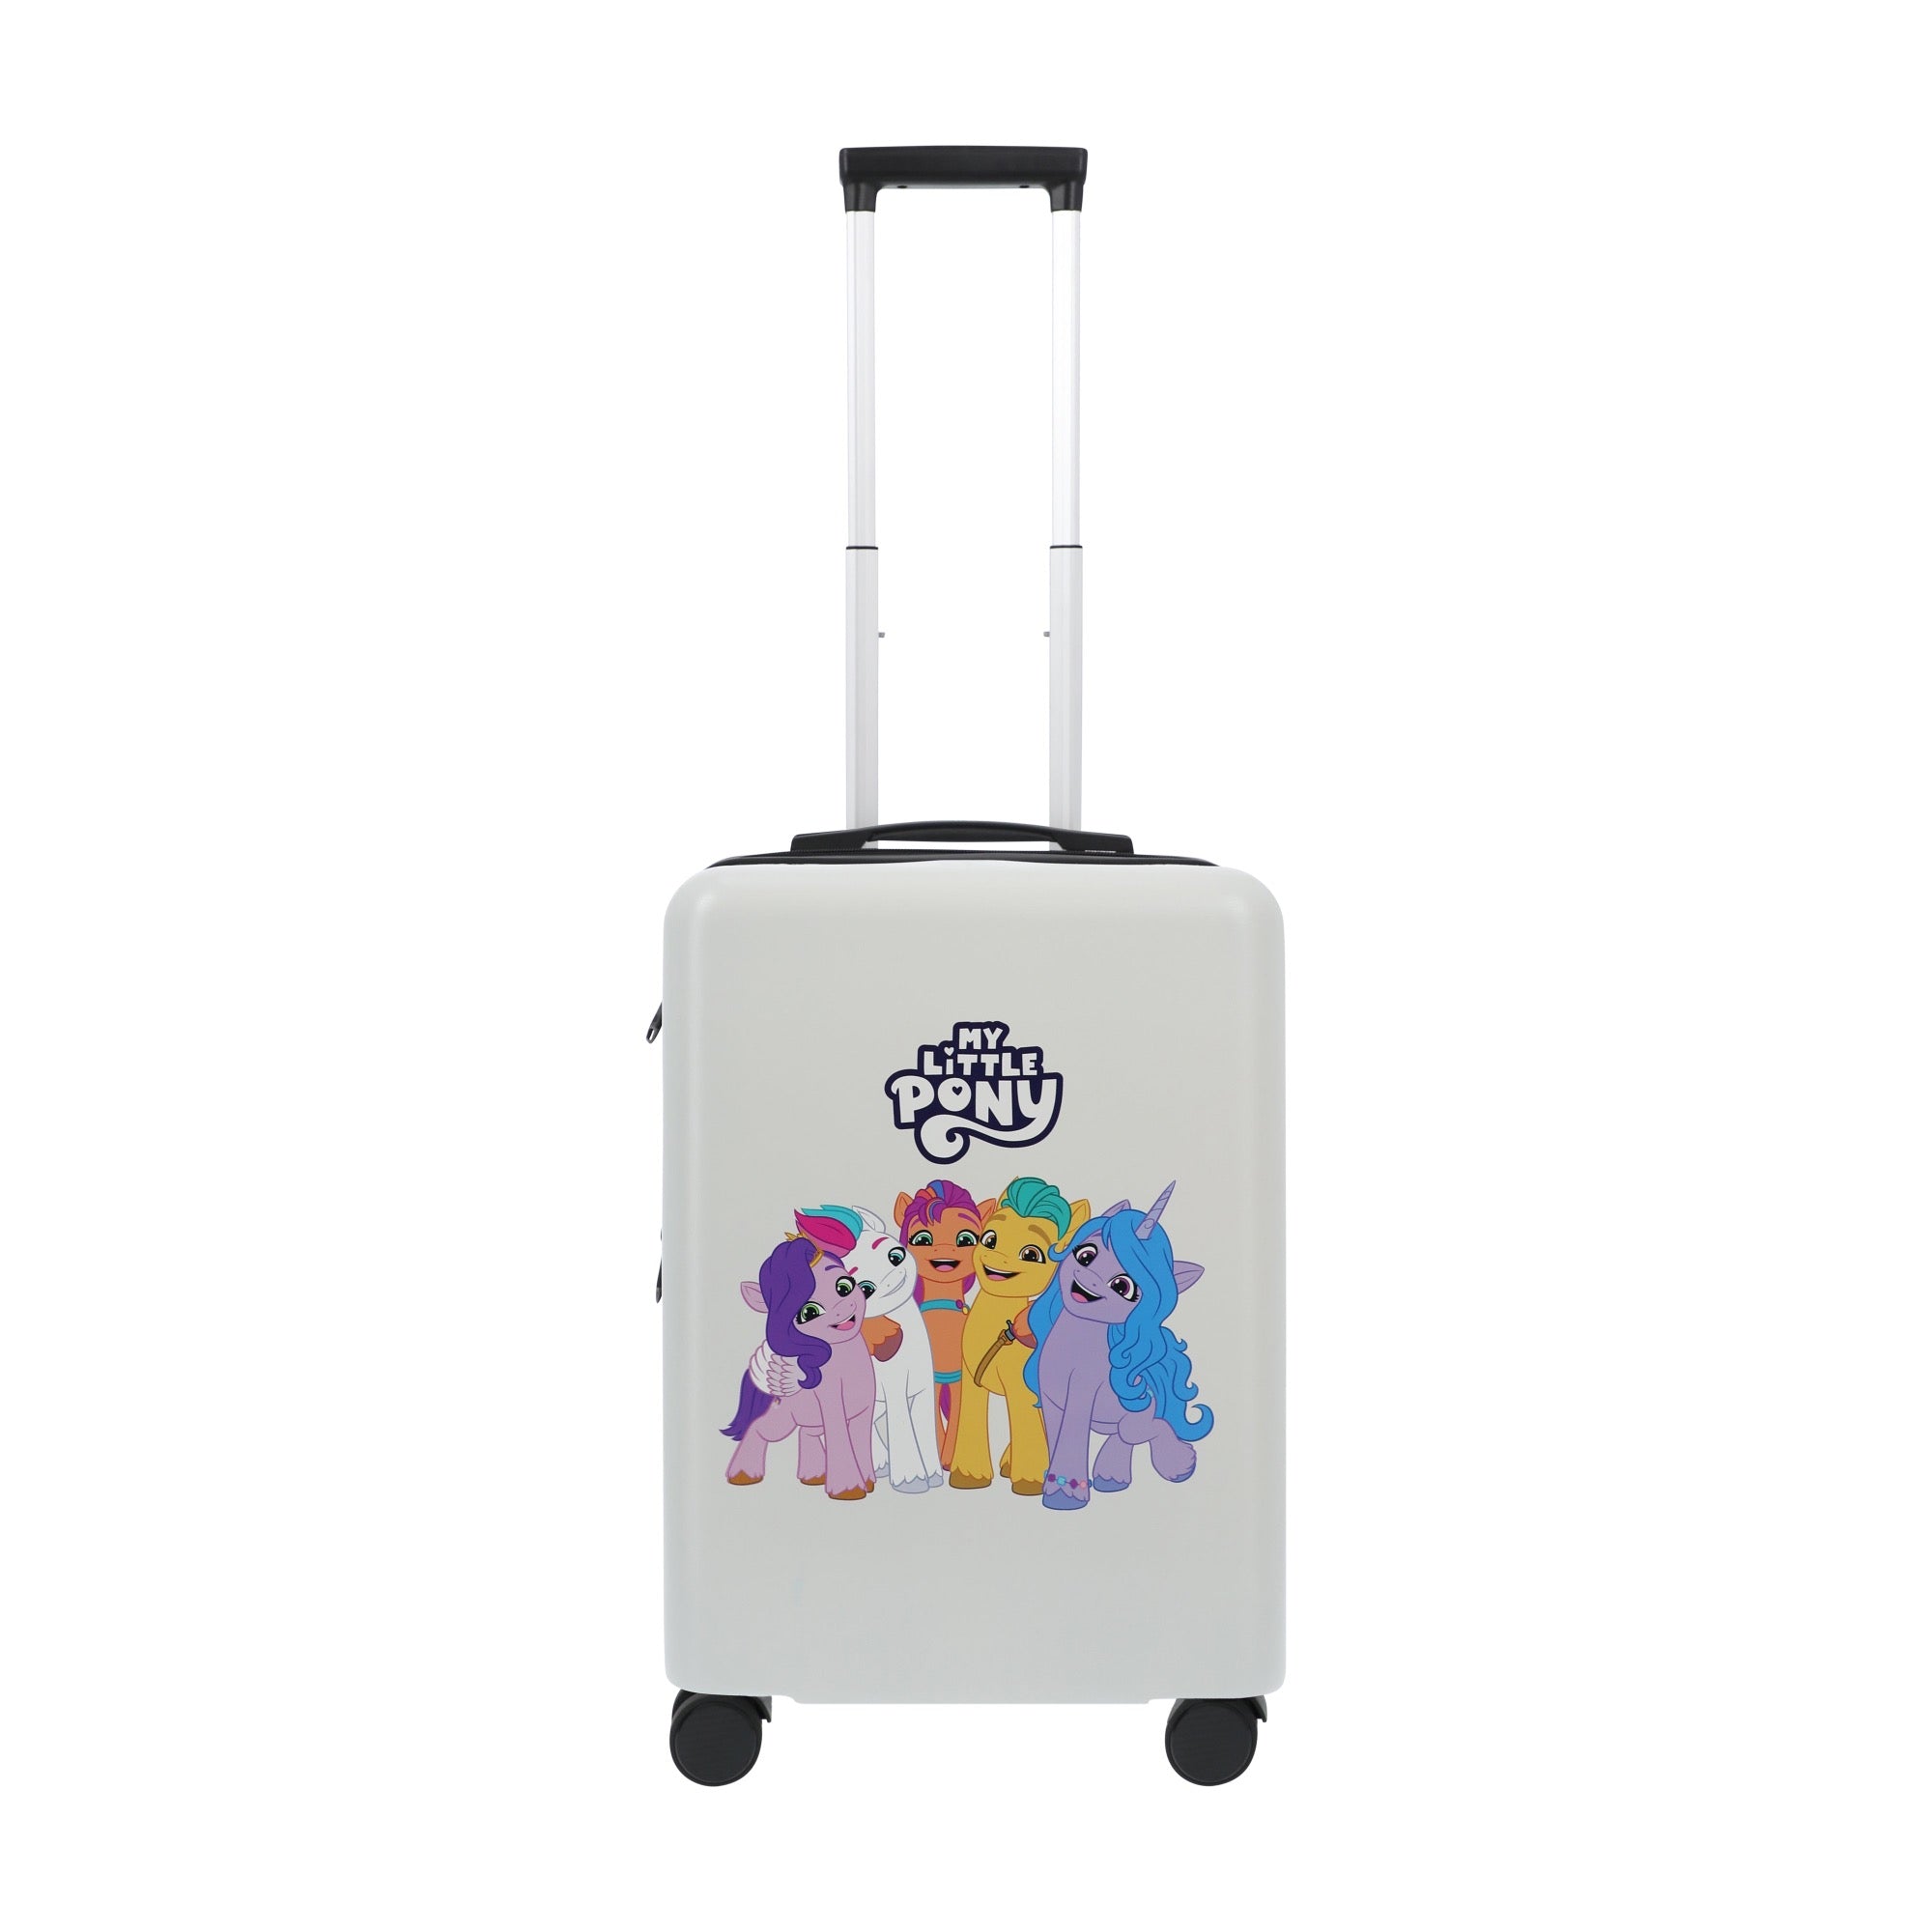 White Hasbro My Little Pony 22.5" carry-on spinner suitcase luggage by Ful